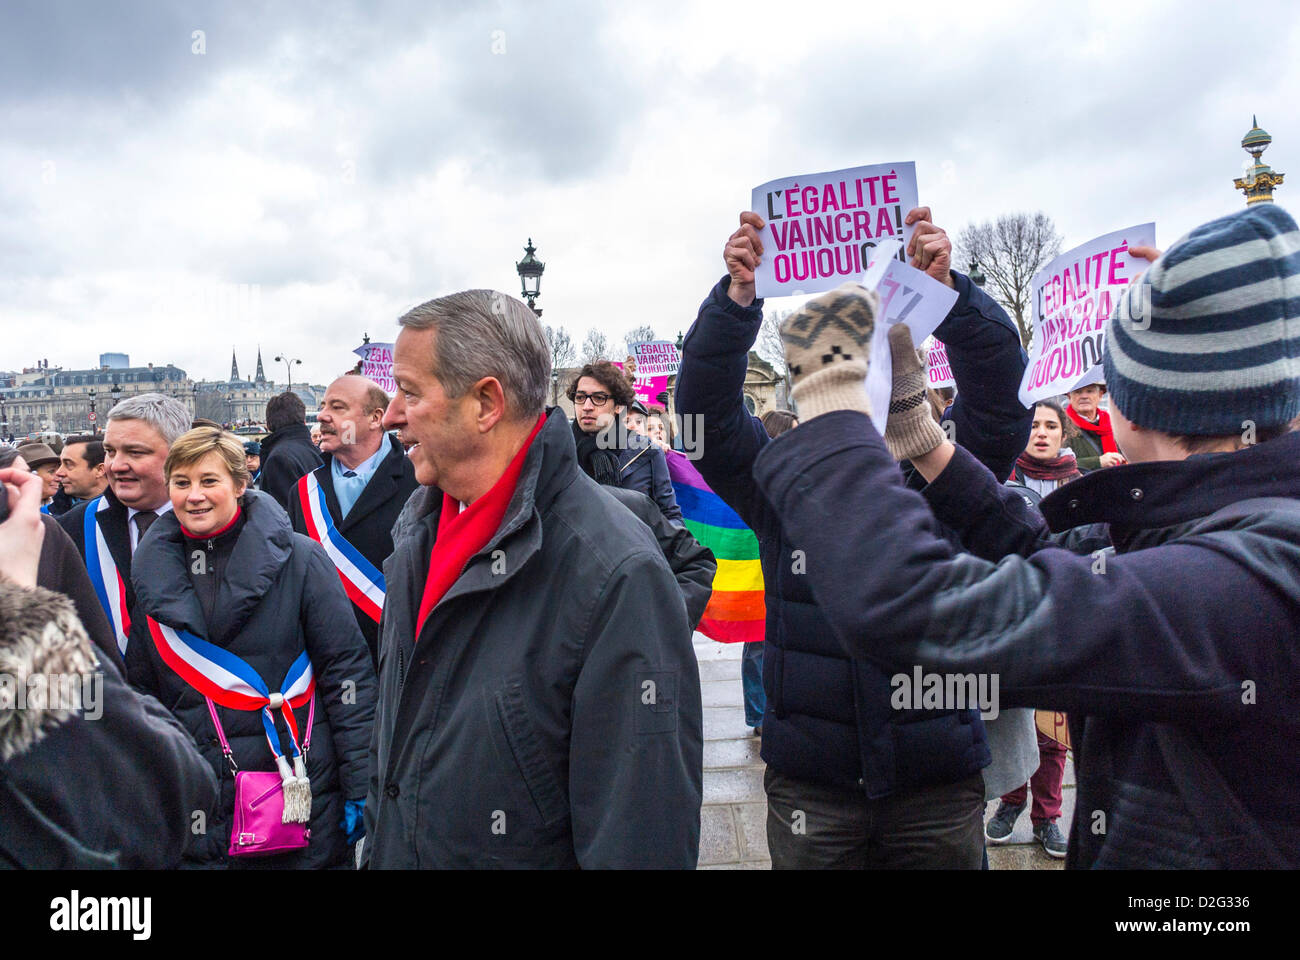 Paris, France. Large Crowd of People, Pro Gay marriage LGTB Activists from 'Oui, Oui, Oui' Protesting French Deputies March Opposing  Gay Marriage Law, Holding Protest Signs, lgbtq protesters with protest sign, equal rights protest Stock Photo